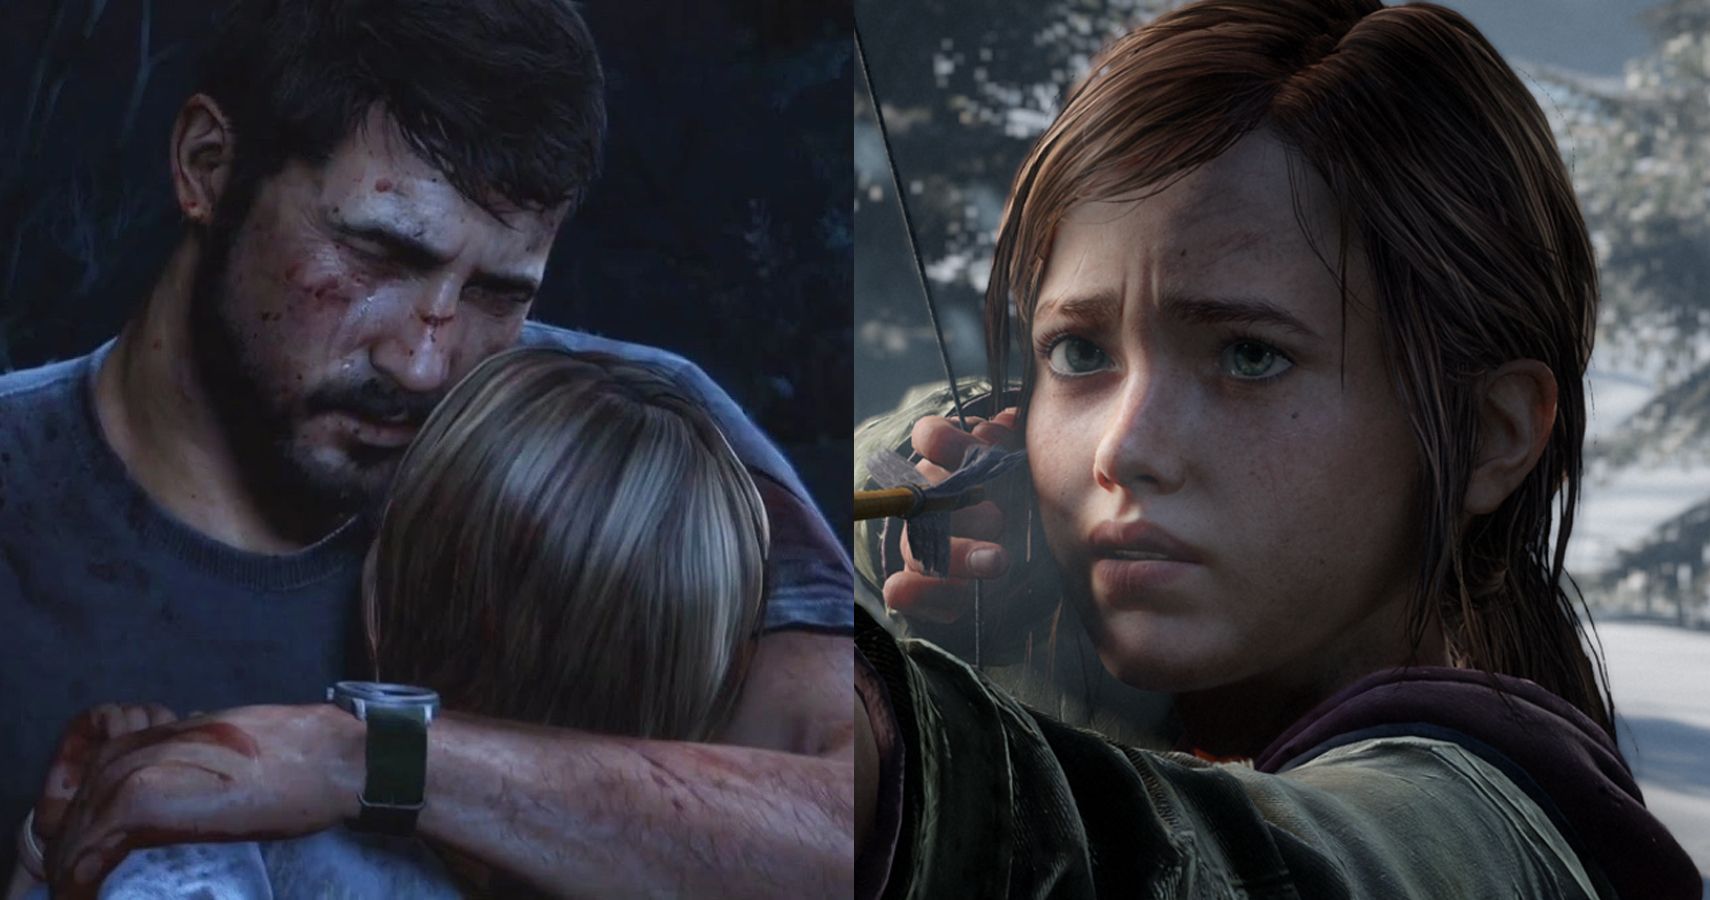 I wish TLoU2 put more focus and development on Tommy and Ellie's  uncle/niece relationship and how they're grieving Joel's death while  drawing parallels to Sarah instead of getting 10 straight hours of